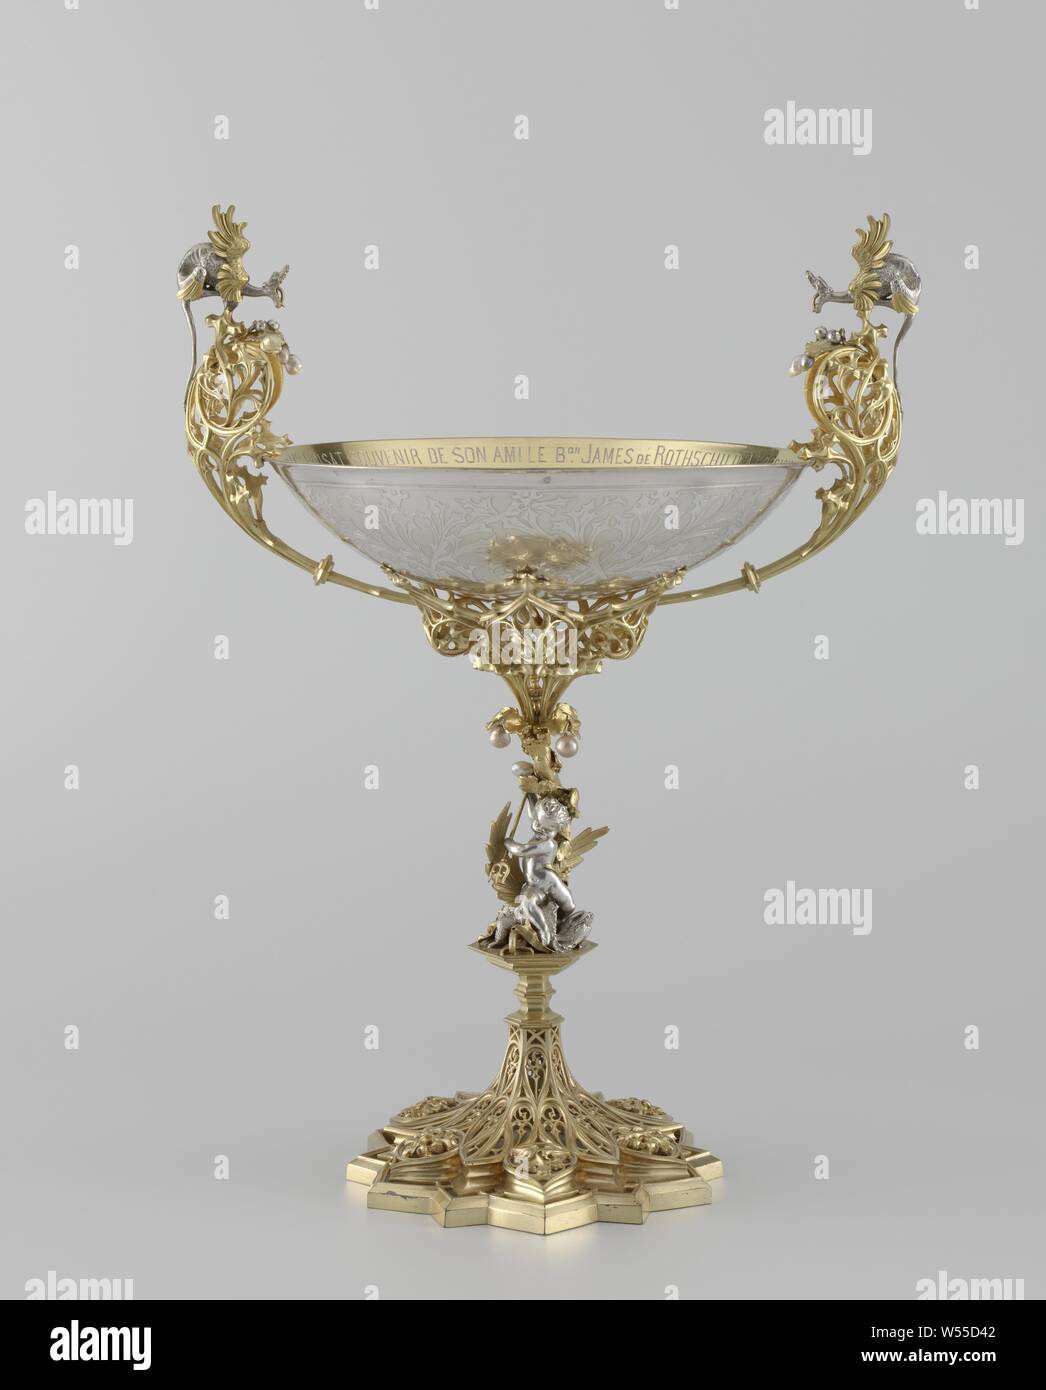 Coupe Coupe Coupe of partially gilt silver with trunk in the shape of a boy who kills a dragon with a trident, Coupe of partially gilt silver and pearls. Star-shaped rejuvenating foot, adorned with neo-gothic tracing, tribe in the form of a boy who kills a dragon with a trident, six-spherical upper part with high curling ears crowned by dragons, between which the shell-shaped cuppa. On the inside of the cuppa an engraved inscription: A MR MEL POISAT, SOUVENIR DE SON AMI LE BON JAMES THE ROTHSCHILD, François Désiré Froment-Meurice, Paris, c. 1849, silver (metal), pearl, gilding (material Stock Photo